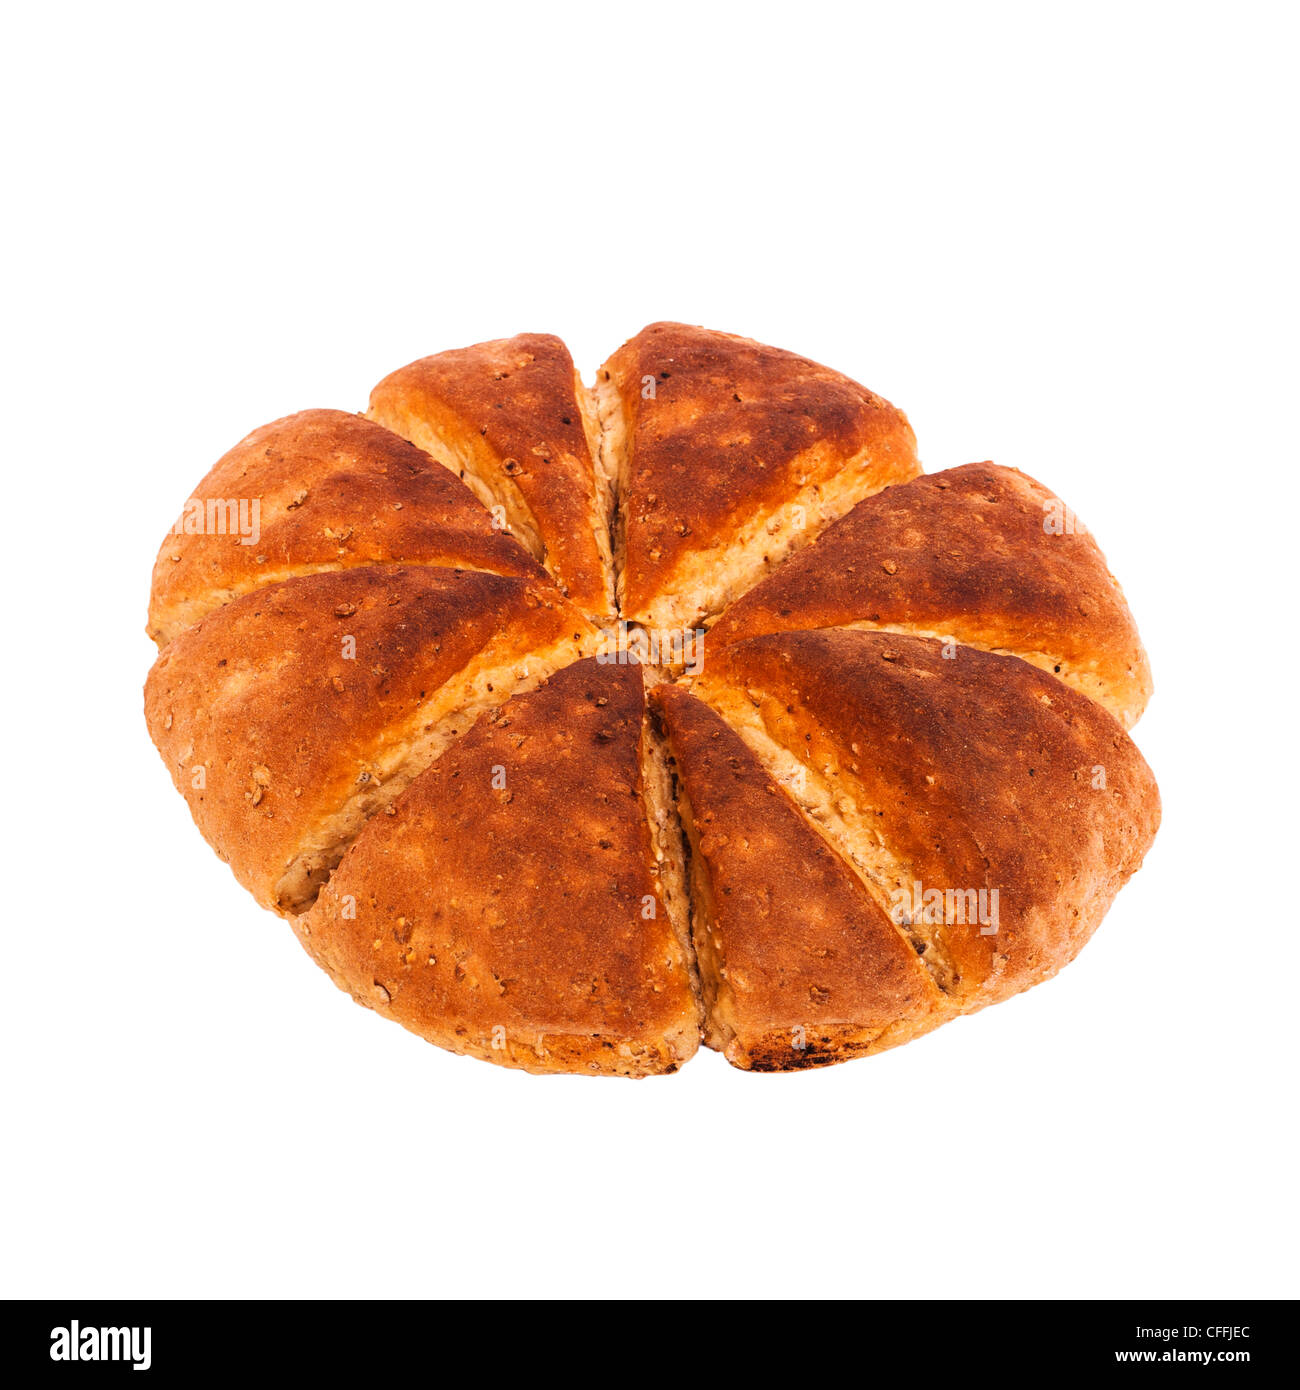 A multigrain round loaf of bread on a white background Stock Photo